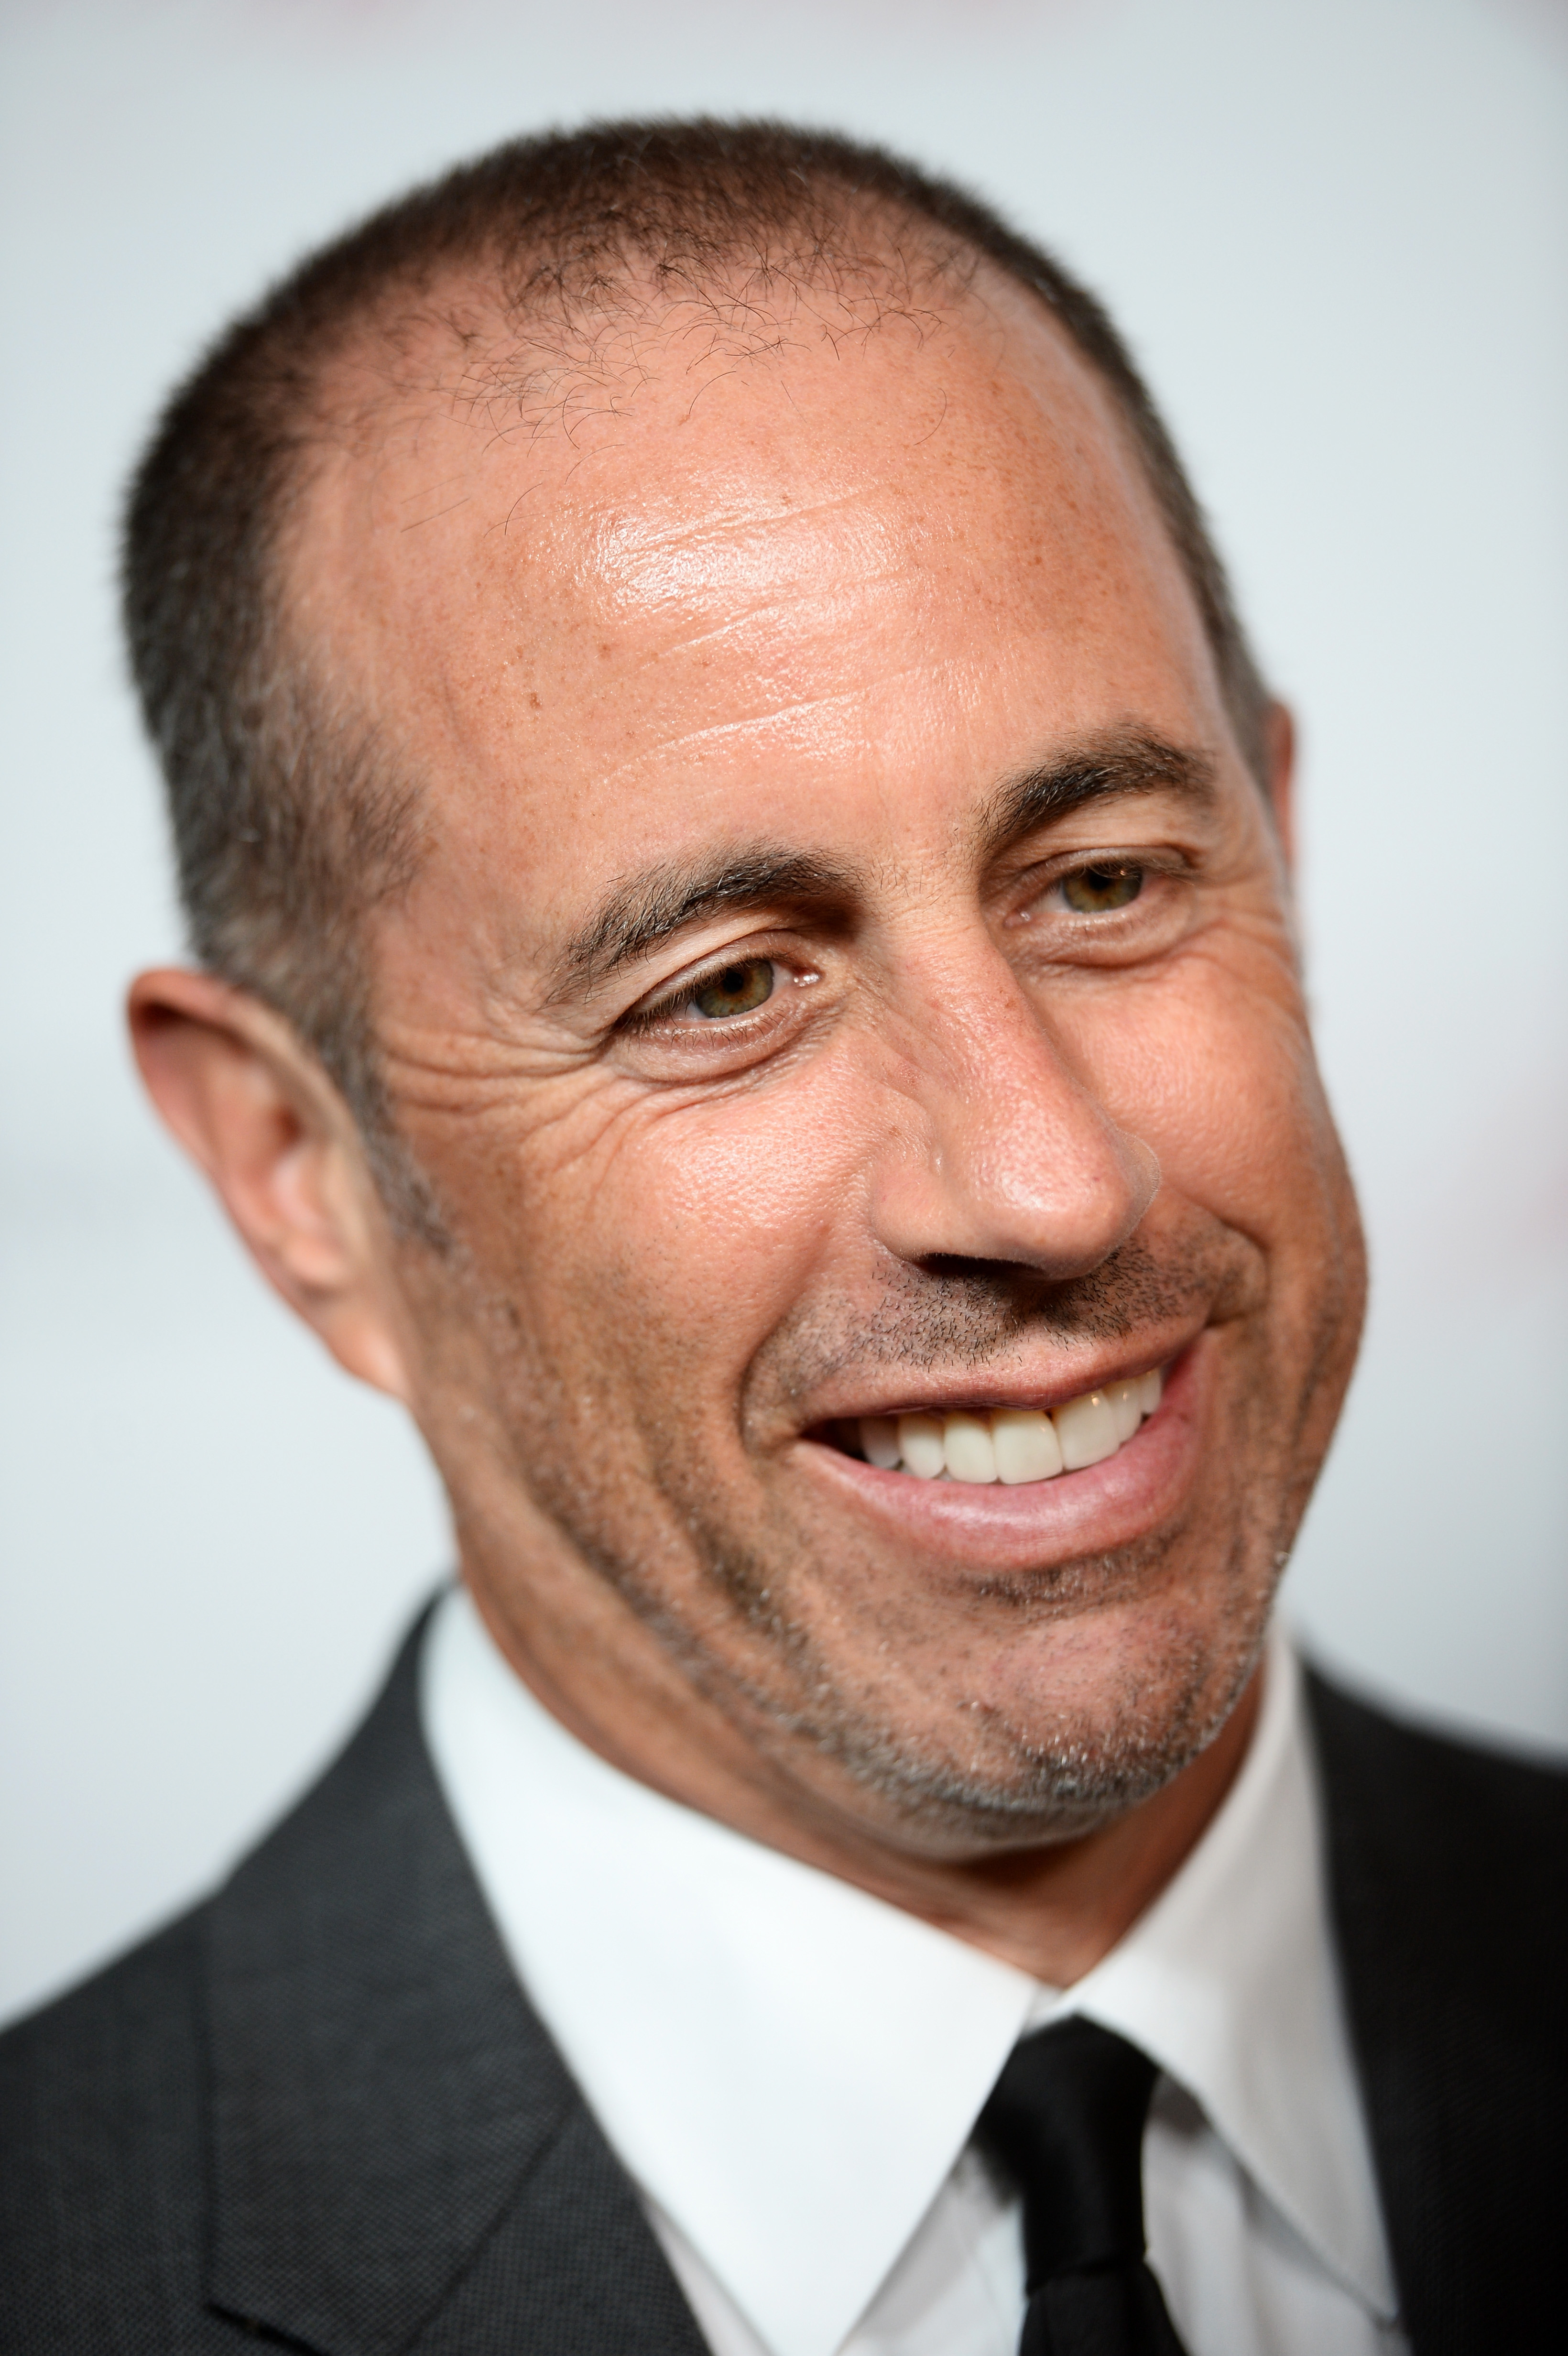 Jerry Seinfeld at the American Friends of Magen David Adom's Third Annual Red Star Ball in Beverly Hills, Calif. on Oct. 22, 2015.